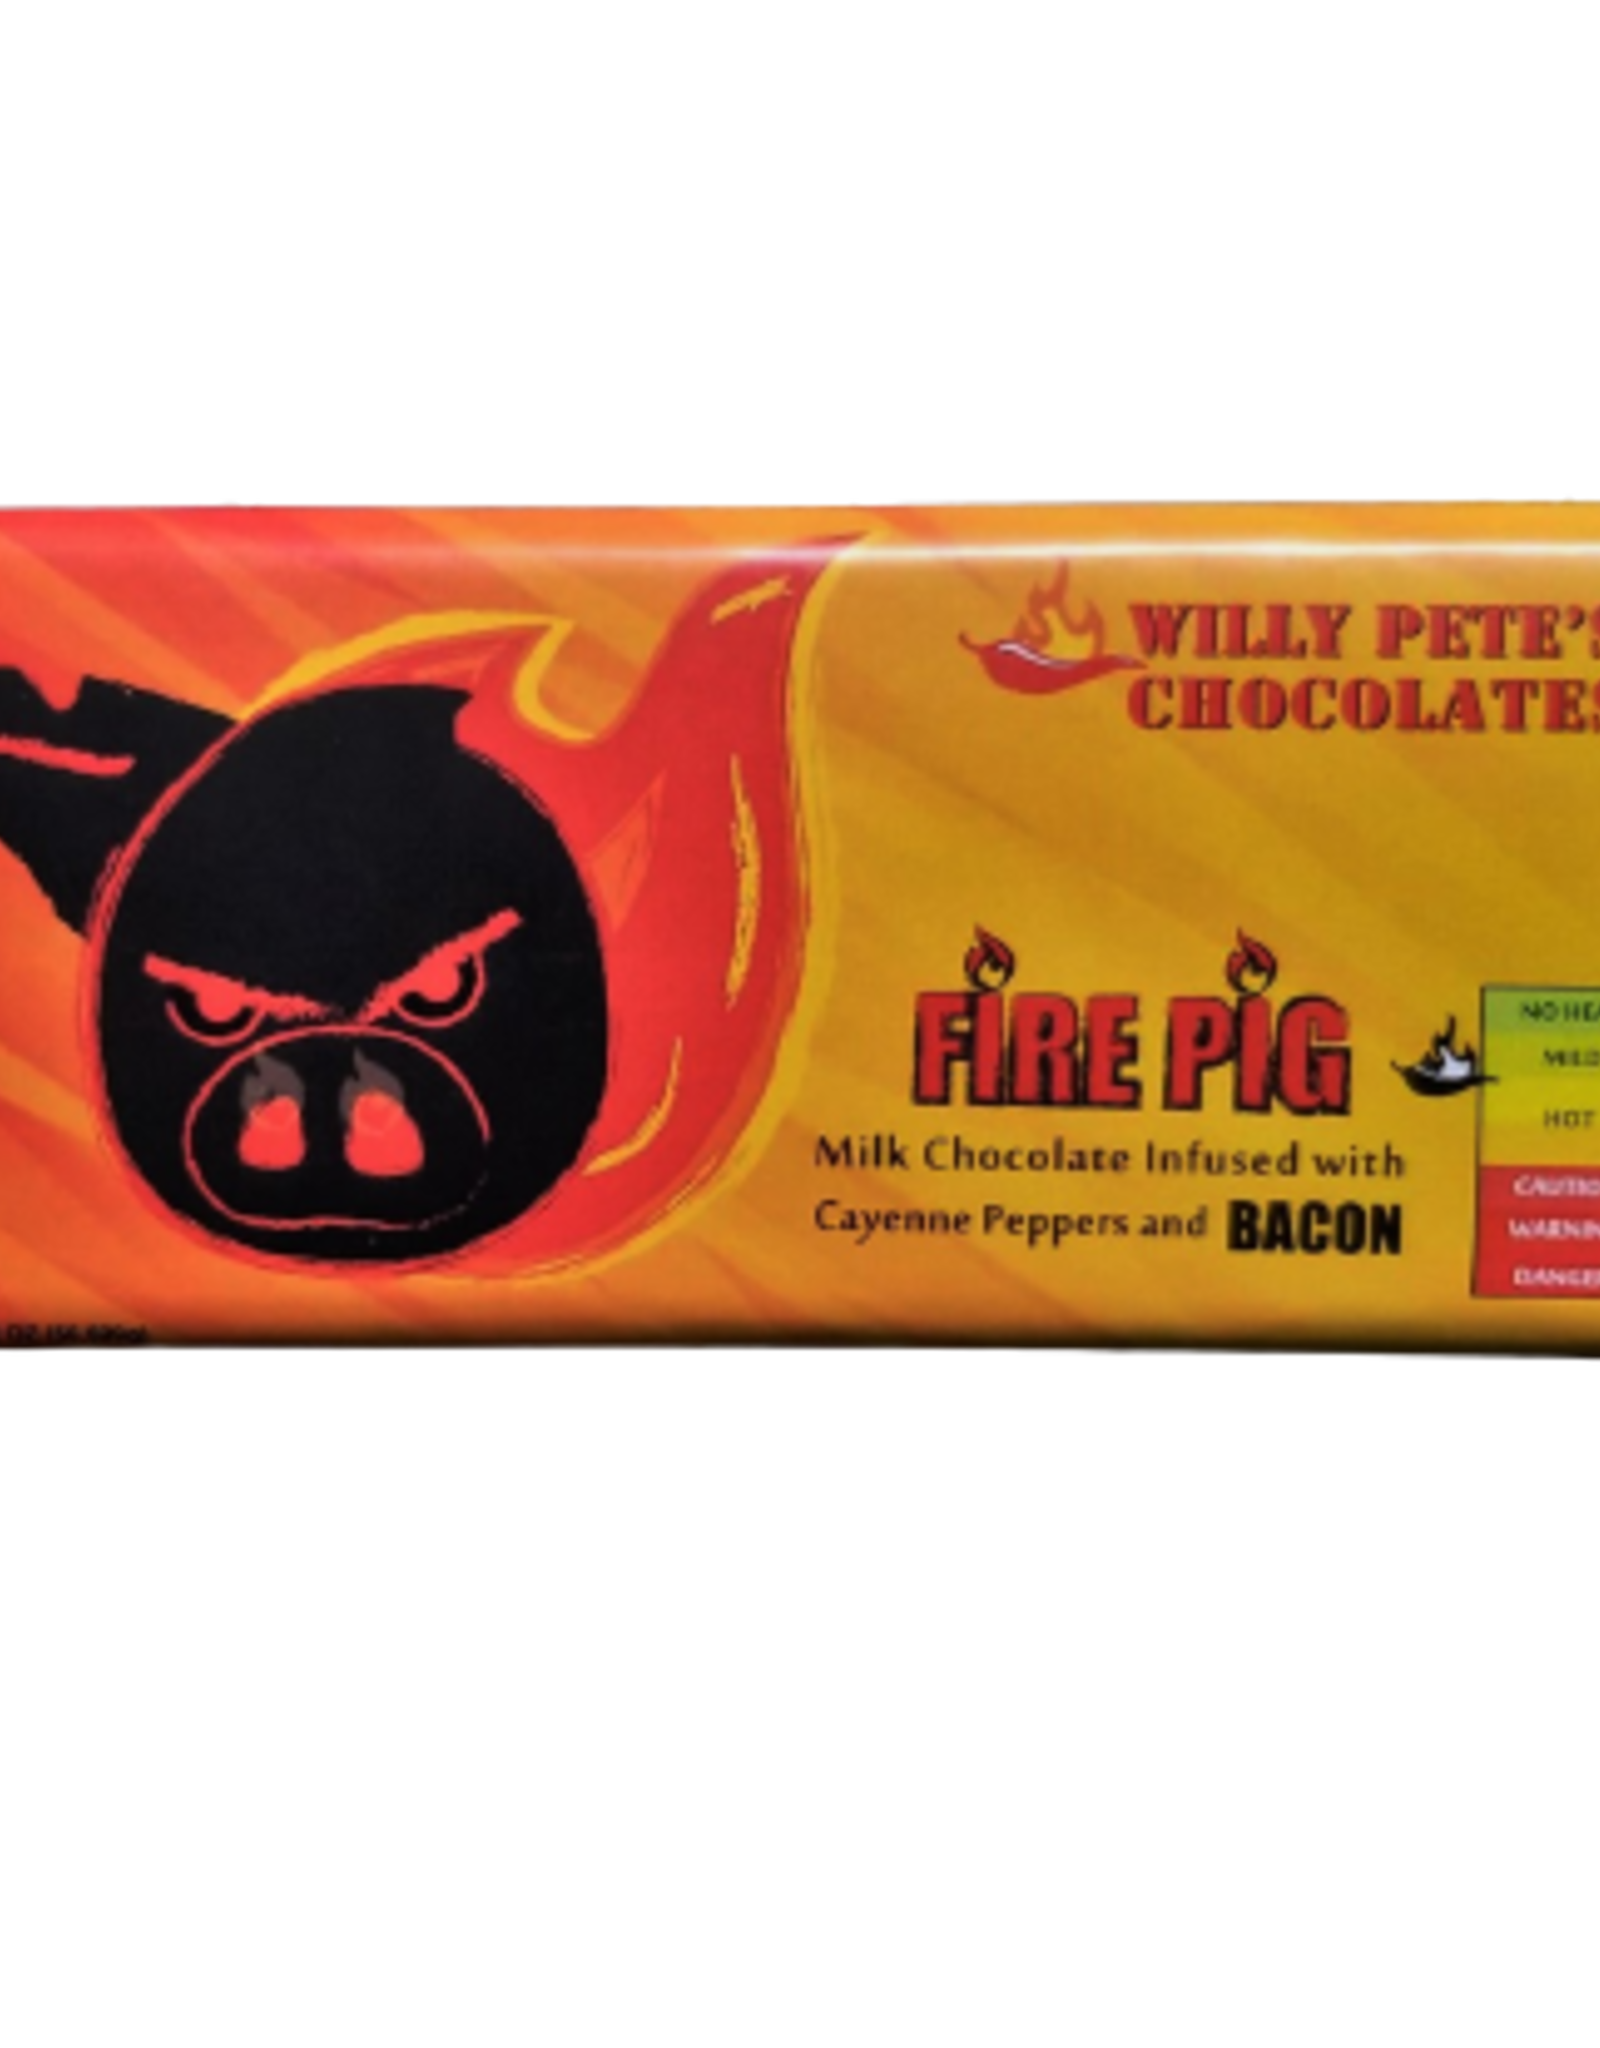 Willy pete’s Fire Pig